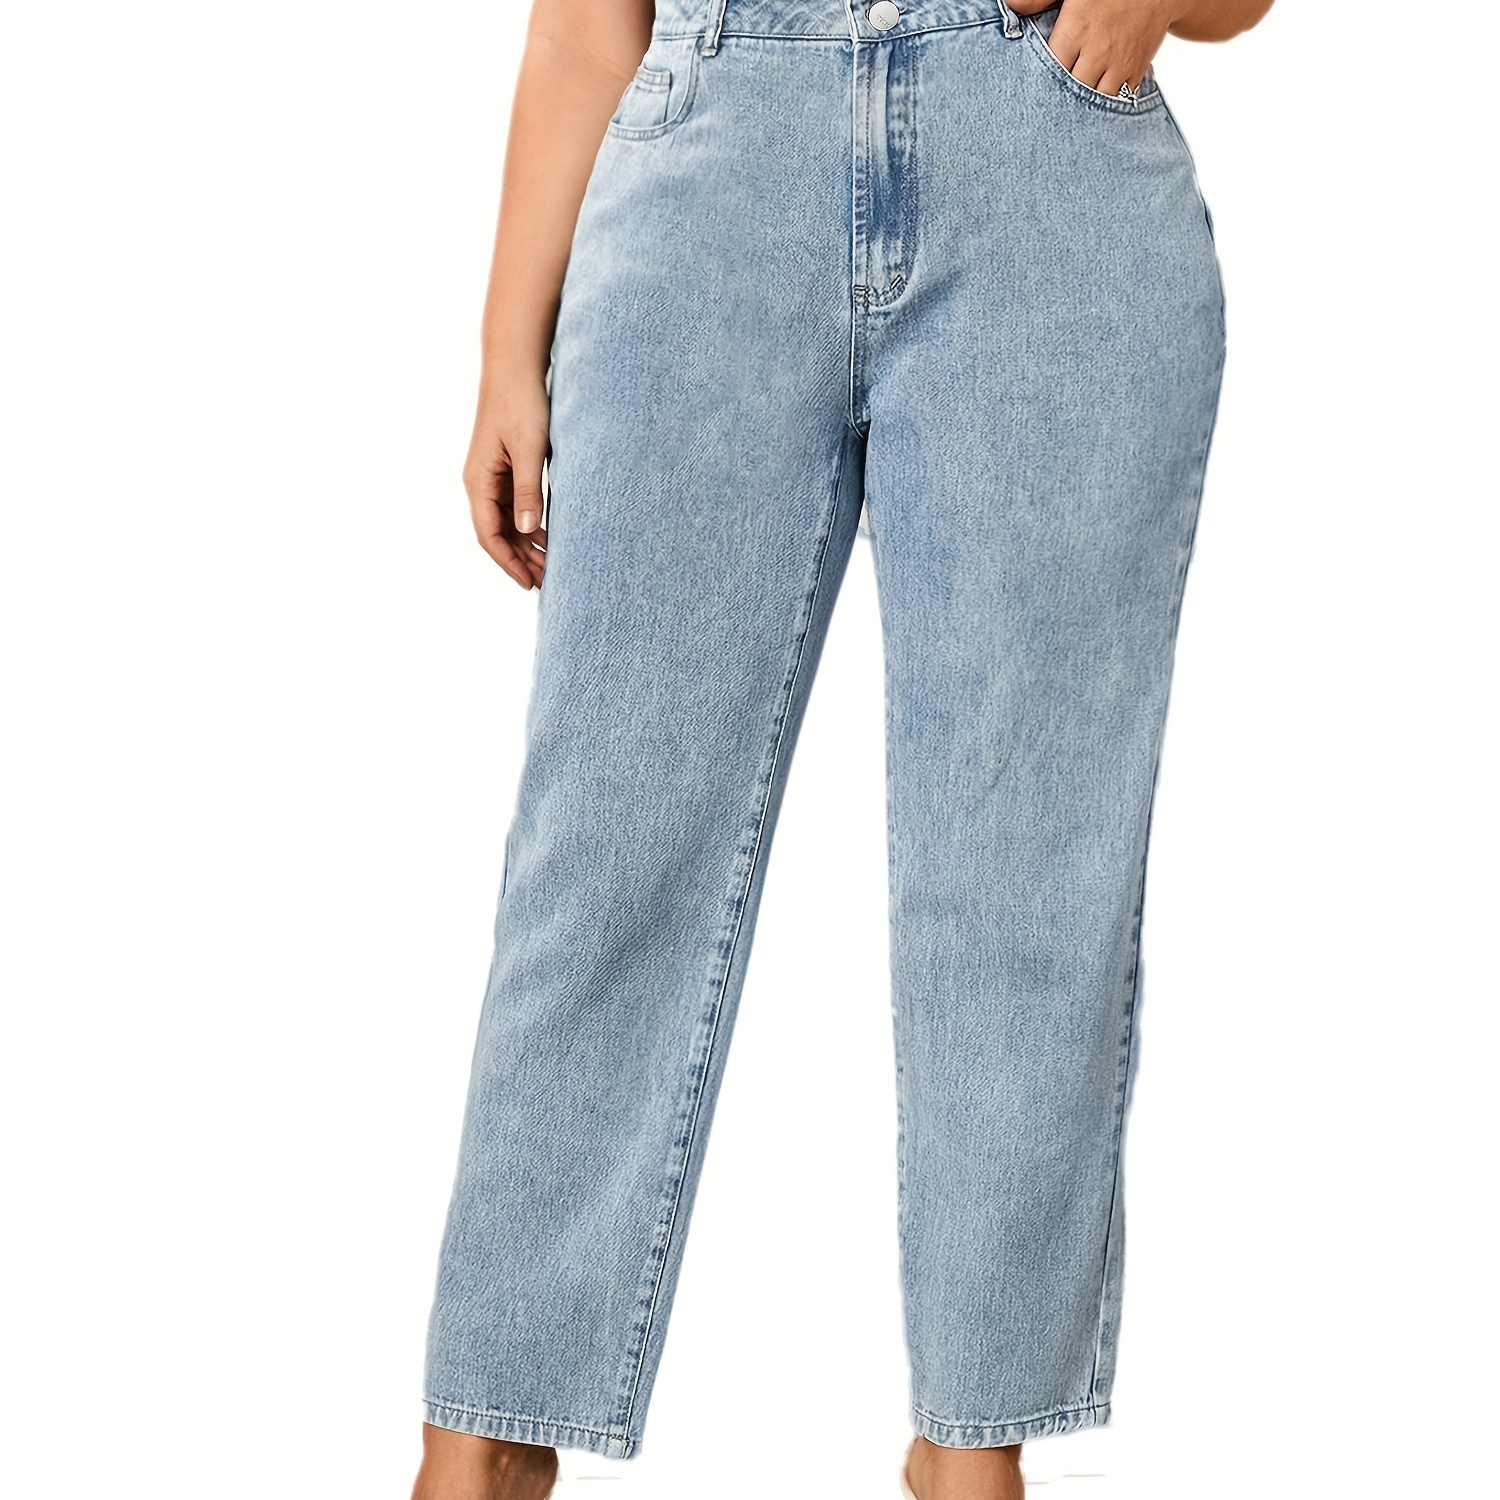 

Plus Size Tapered Jeans For Women High Waist High Strethcy Denim Jeans Pants Full Length Strethcy Denim Jeans Pants Light Blue Jeans Mom Pants